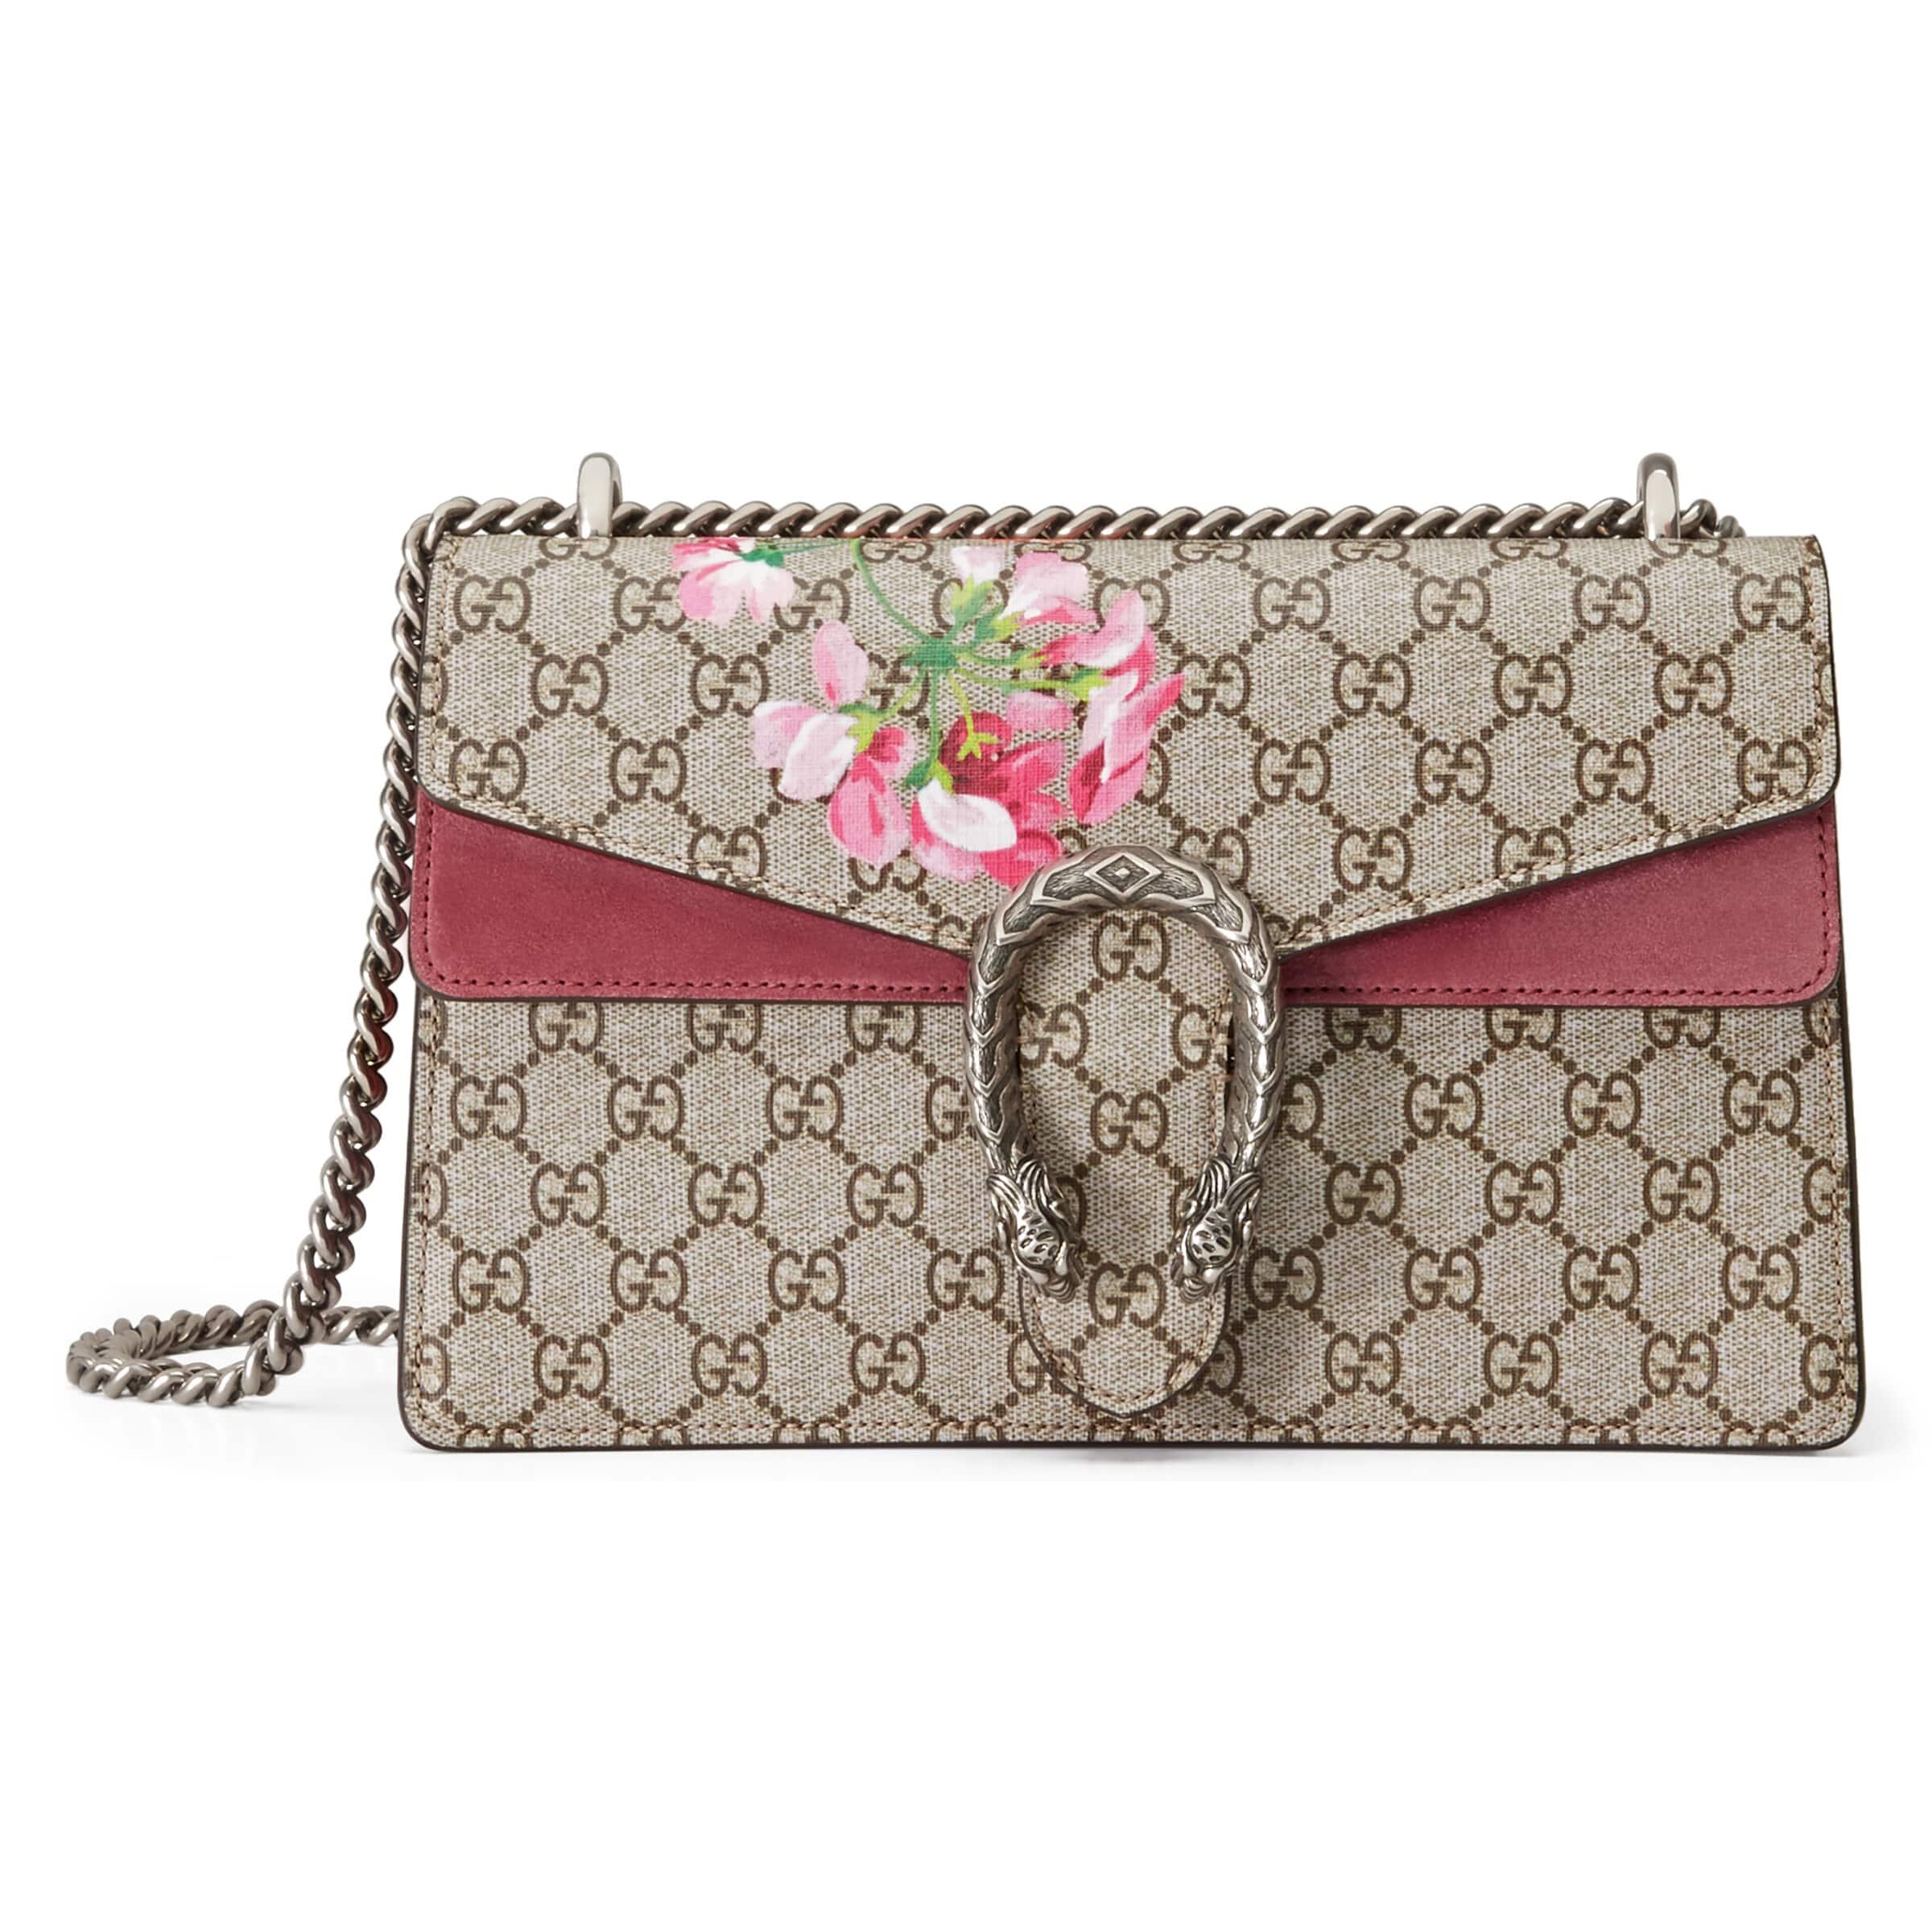 Gucci Canvas 2016 Re-edition Dionysus GG Blooms Bag in Beige (Natural) -  Save 27% - Lyst